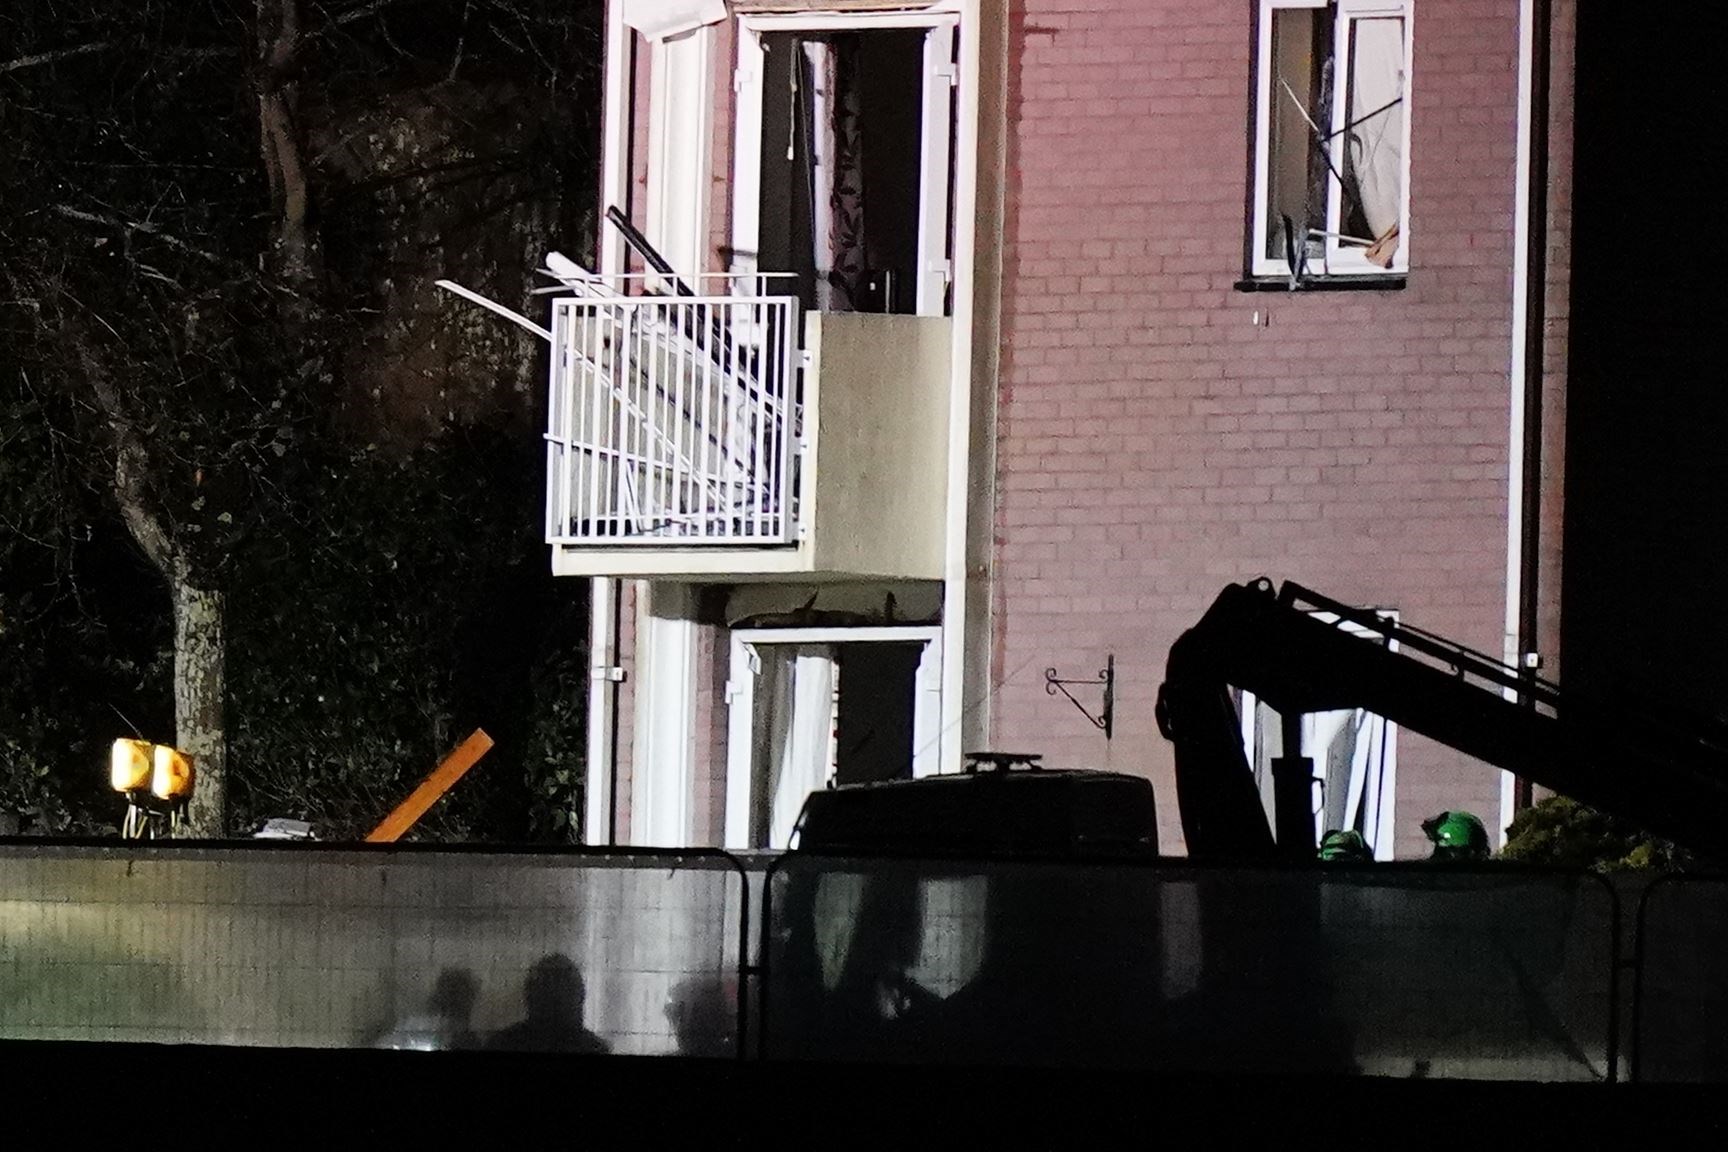 Emergency personnel at the scene of an explosion and fire at a block of flats in St Helier (Aaron Chown/PA)